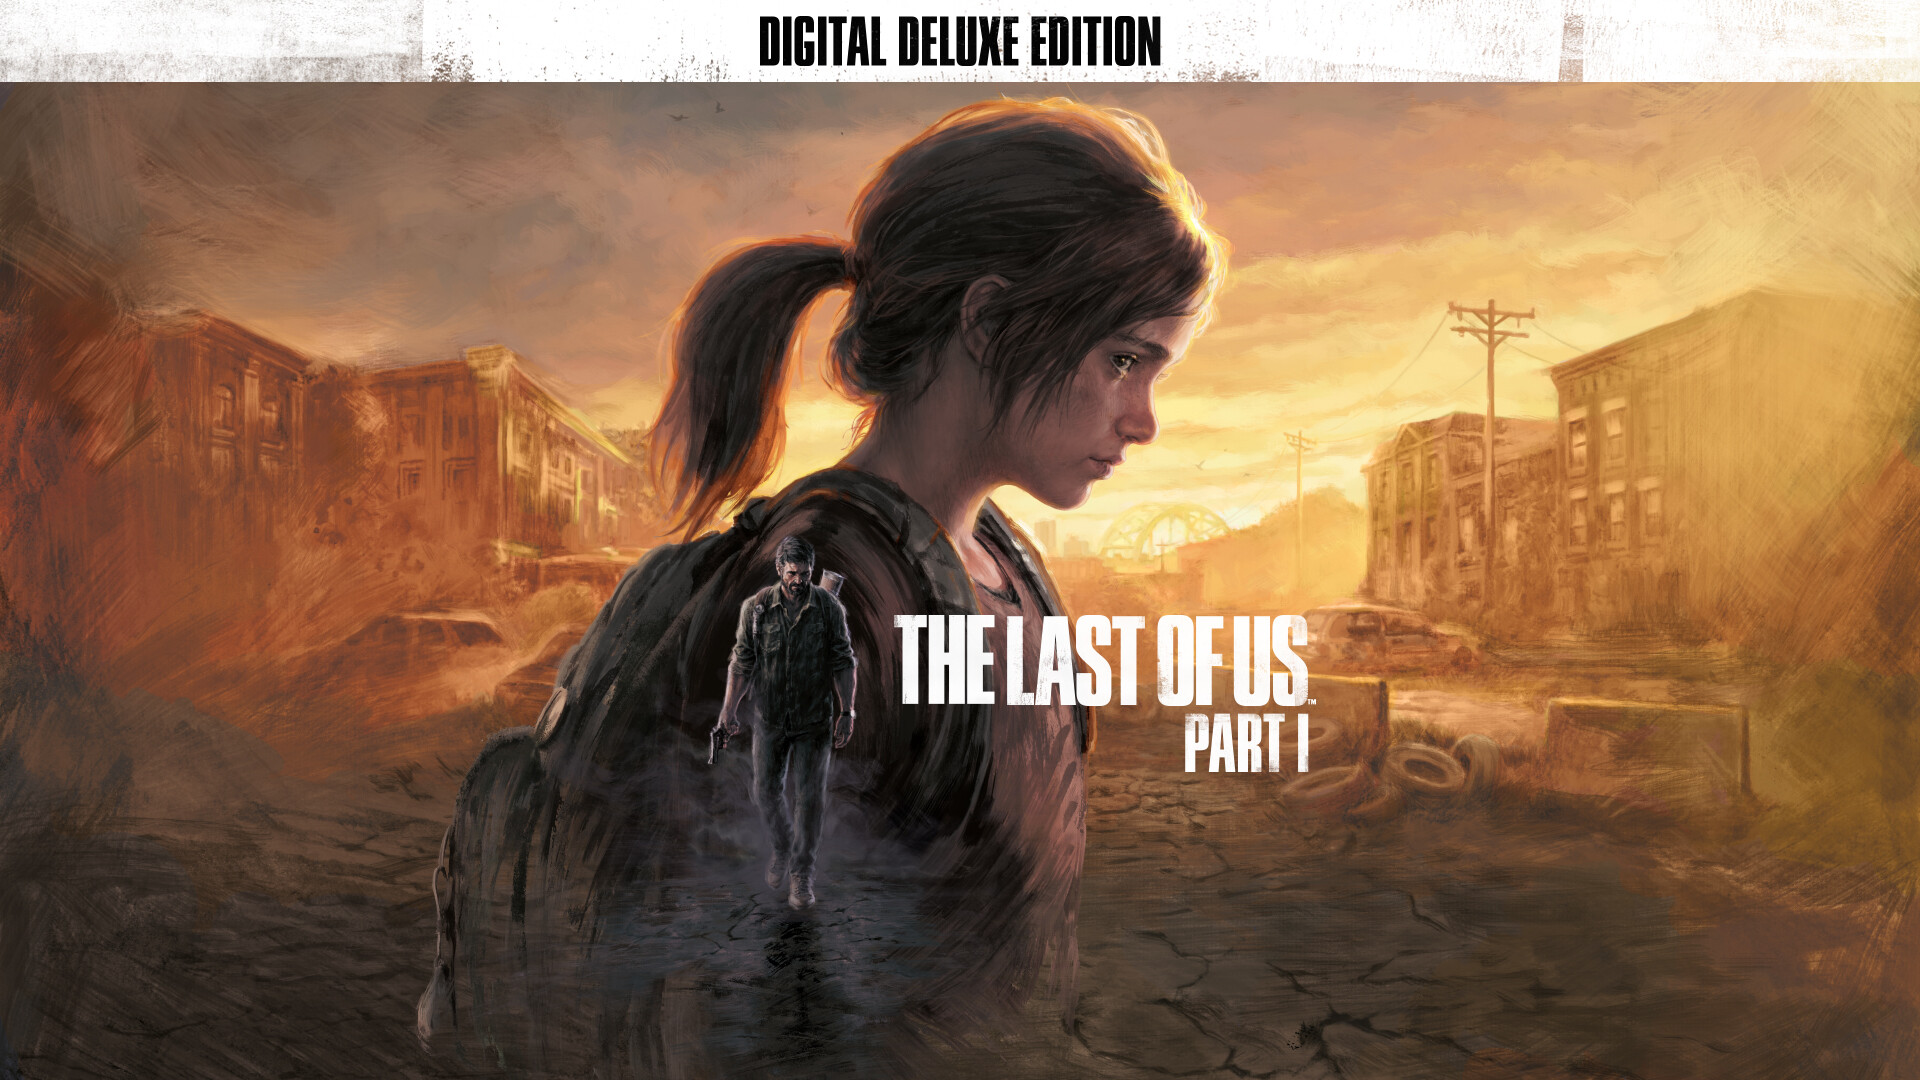 The Last of Us™ Part I - Upgrade to Digital Deluxe Edition Featured Screenshot #1